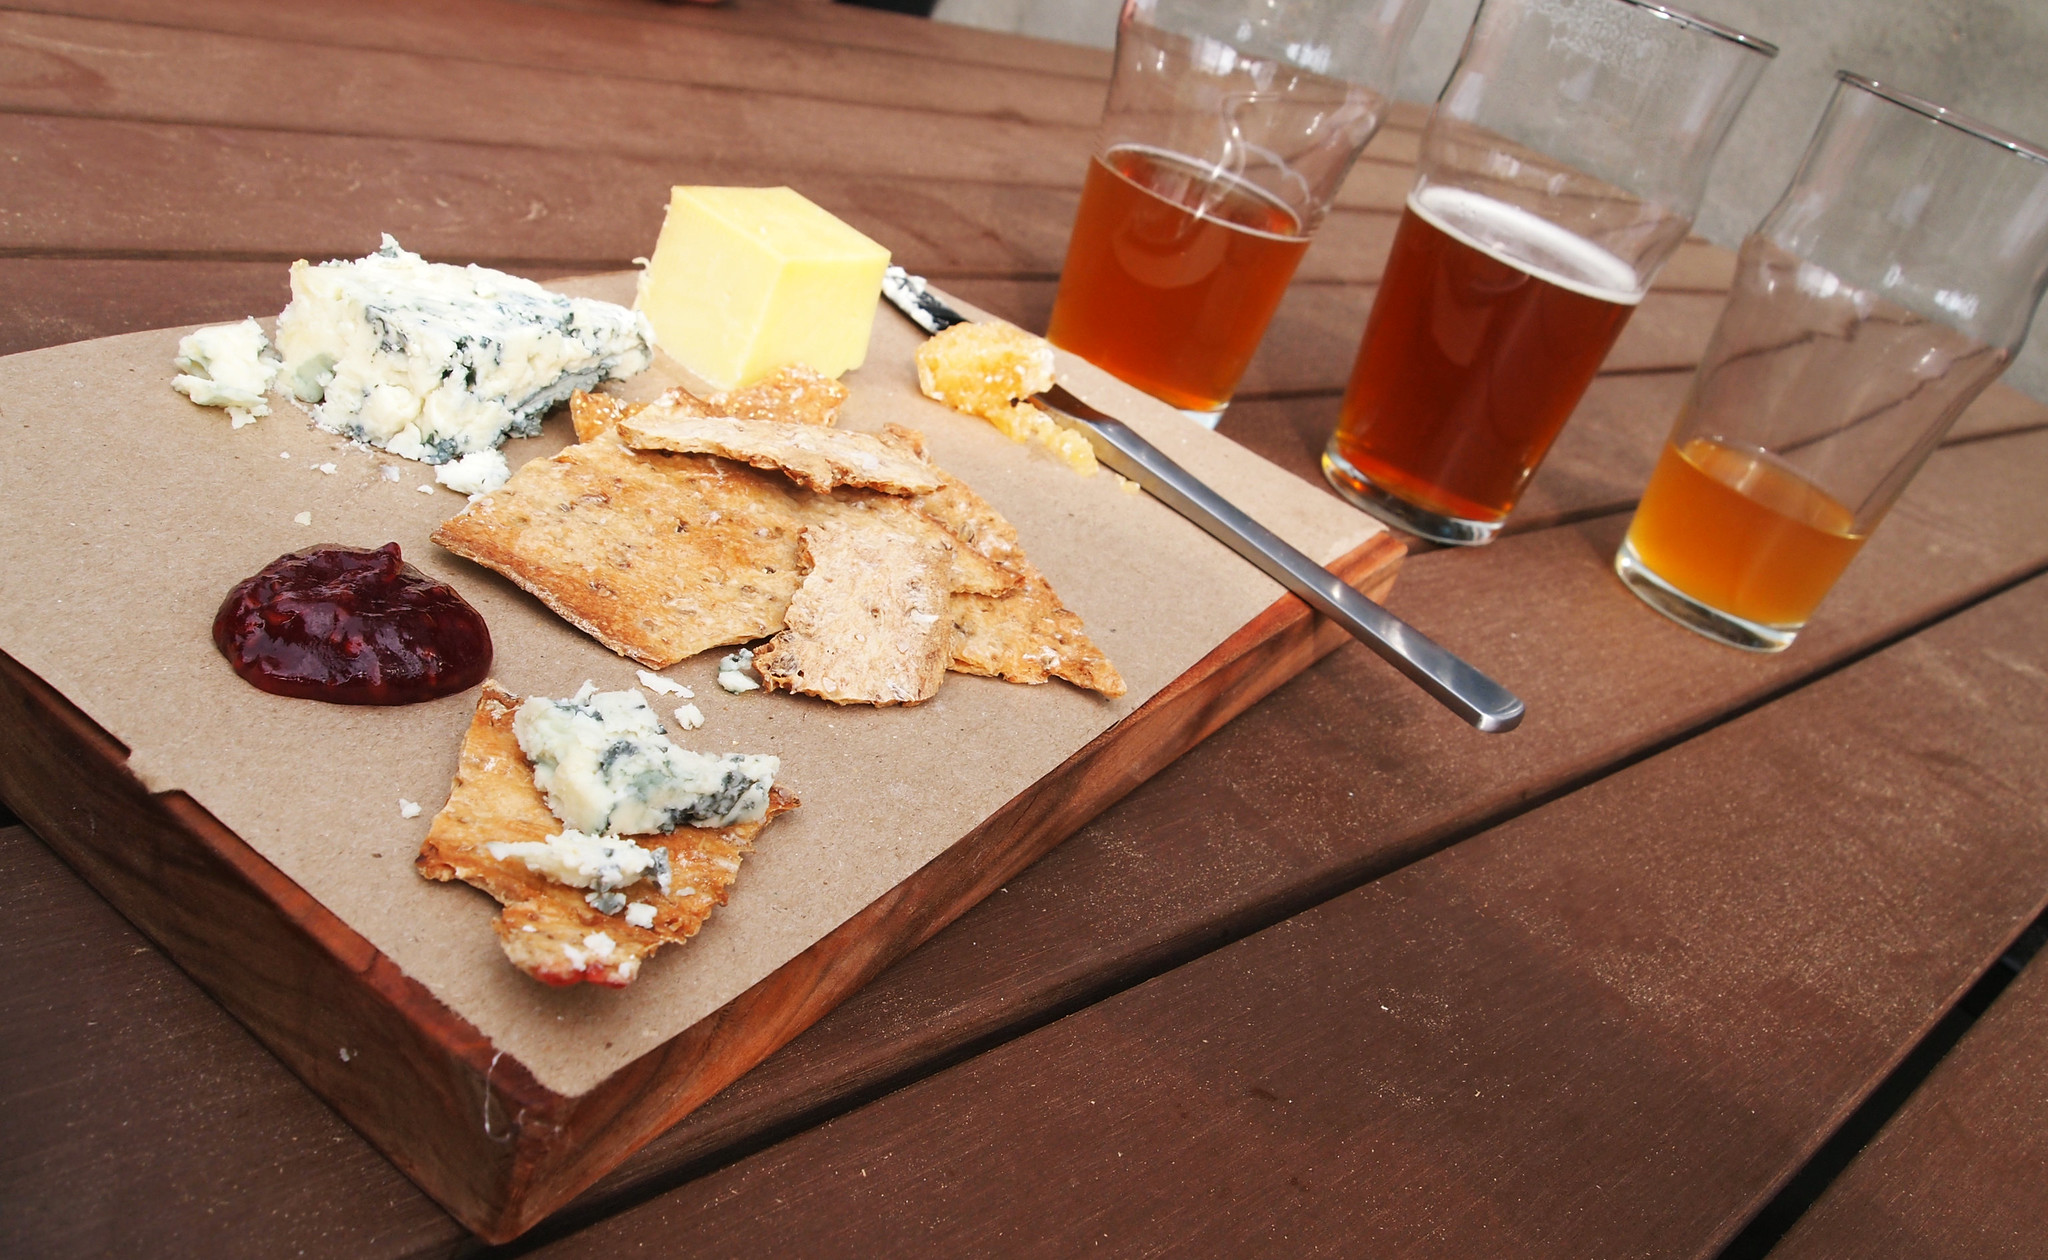 Three types of cheese, including blue cheese, sit on a charcuterie board with crackers. Three different half-full glasses of beer sit on the table in the background.